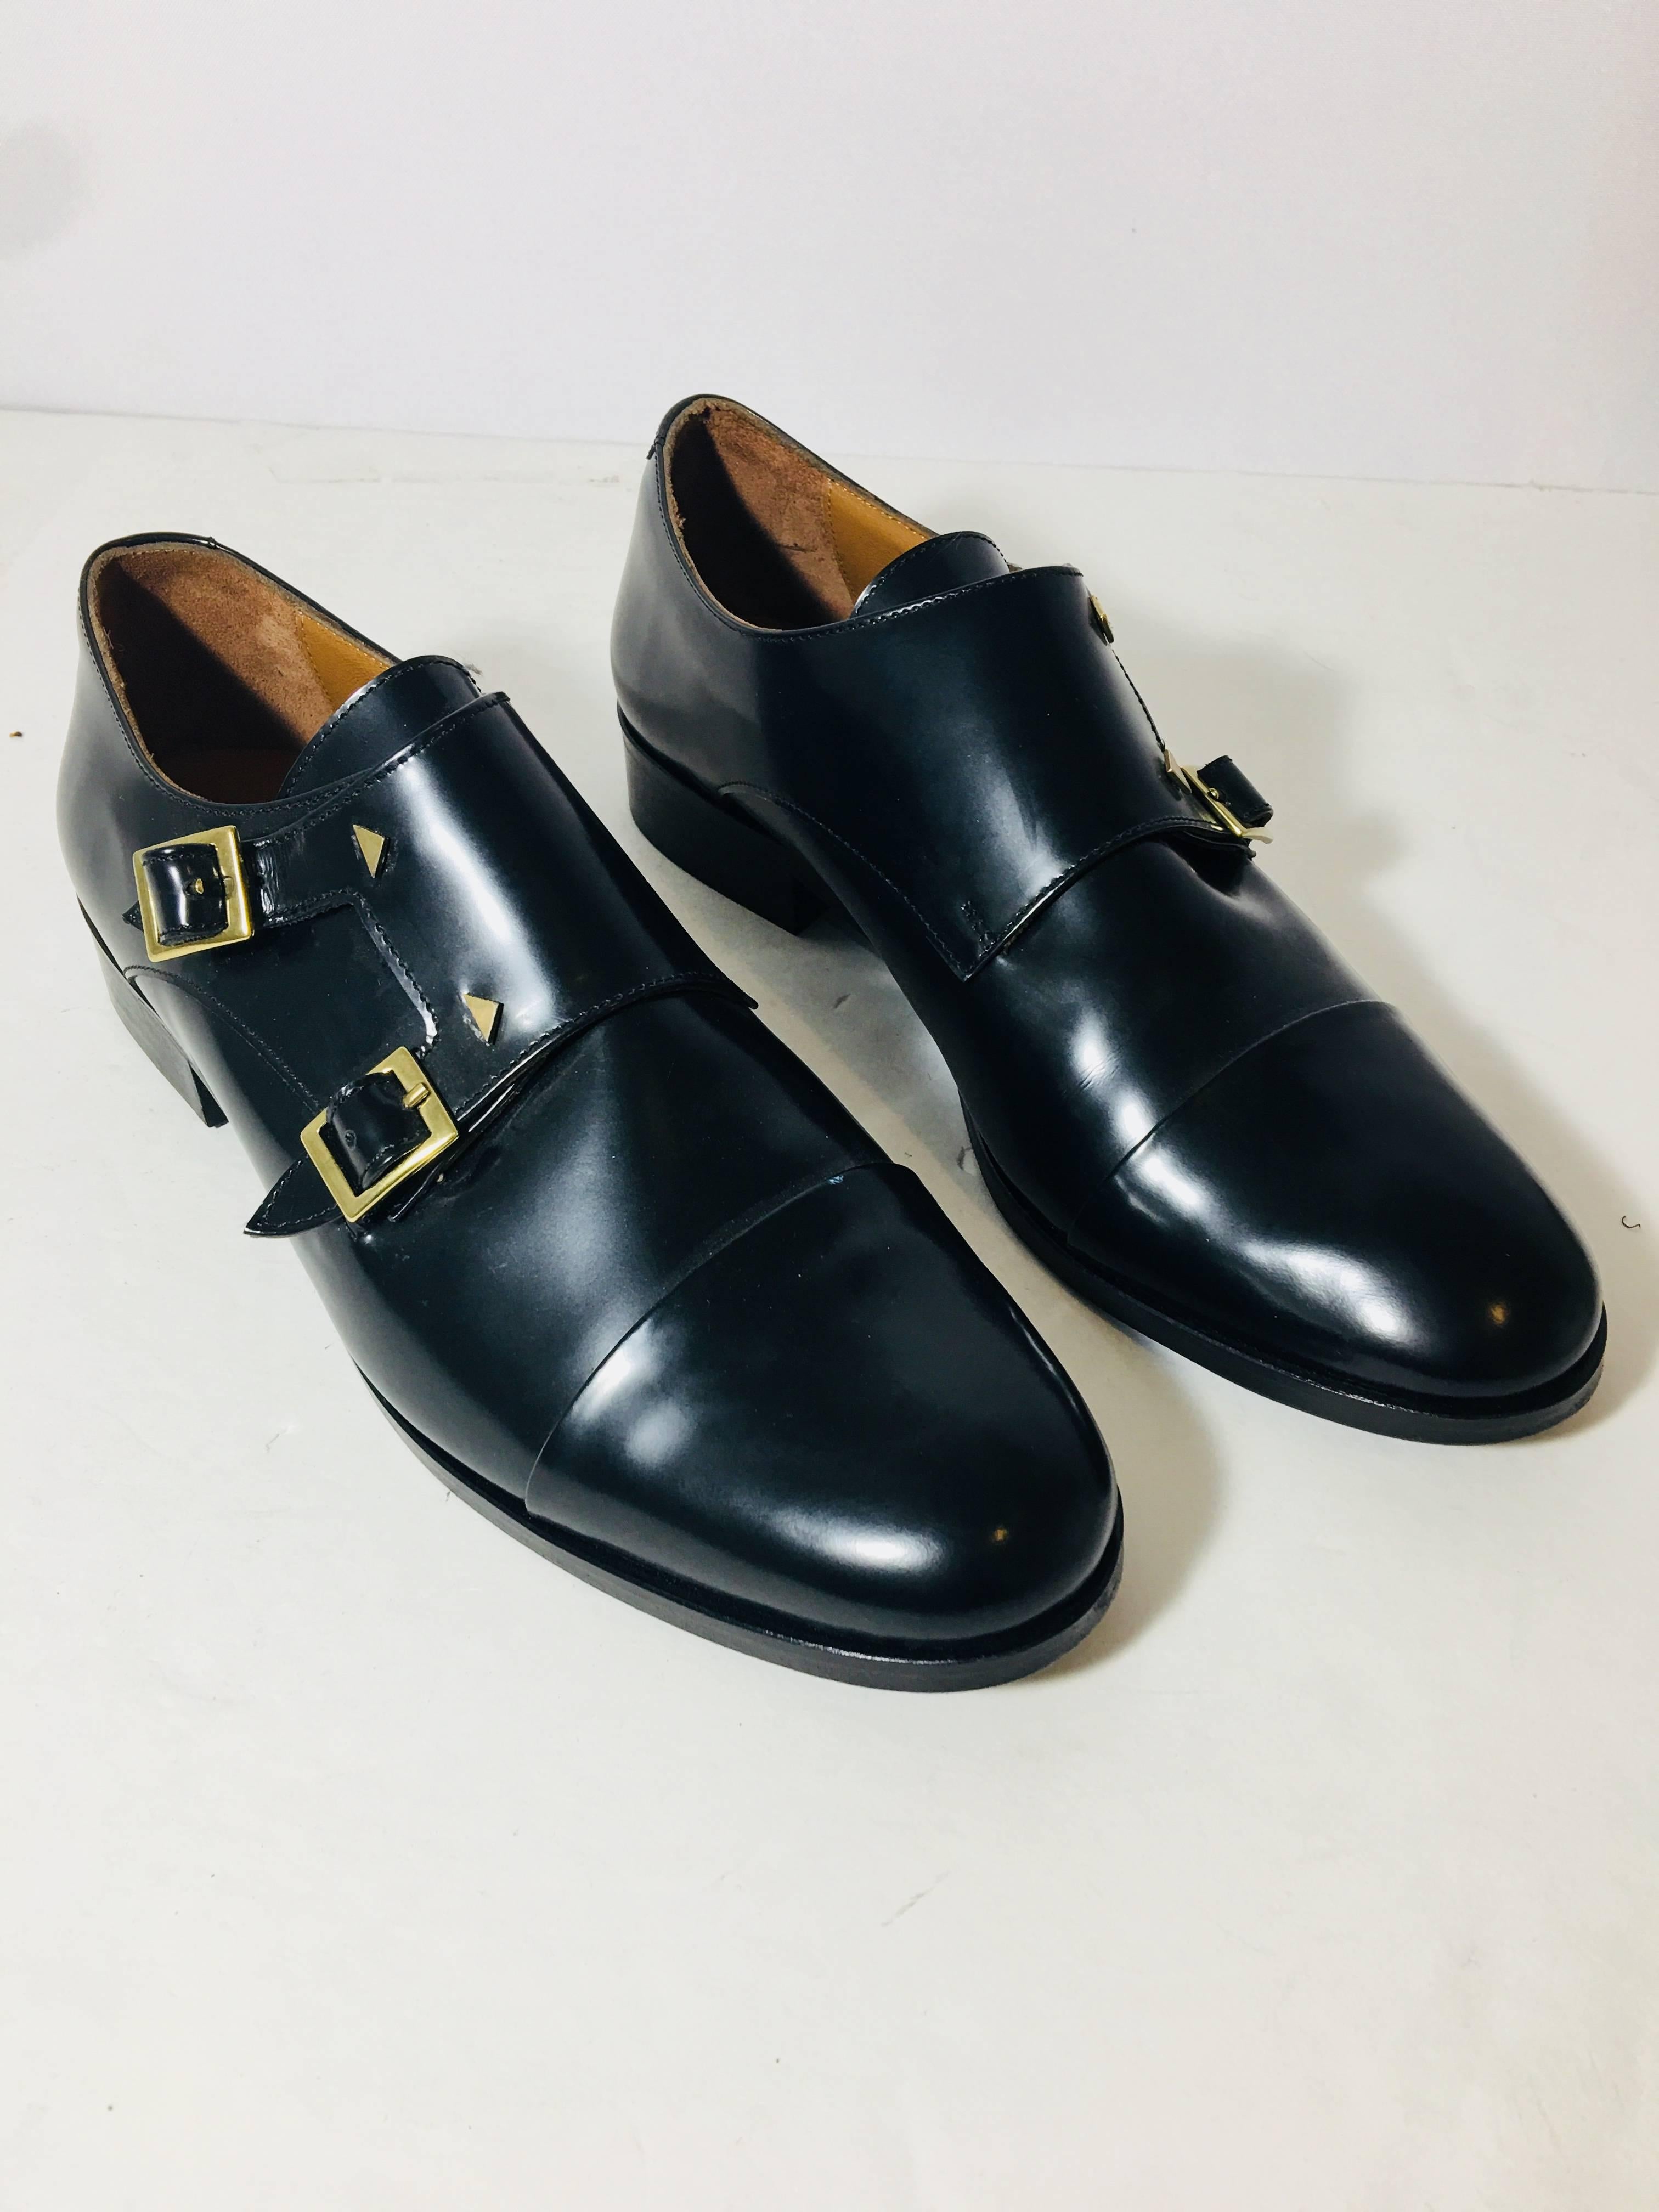 Anne Thomas Oxford Shoes- Patent Leather with Buckle Closure